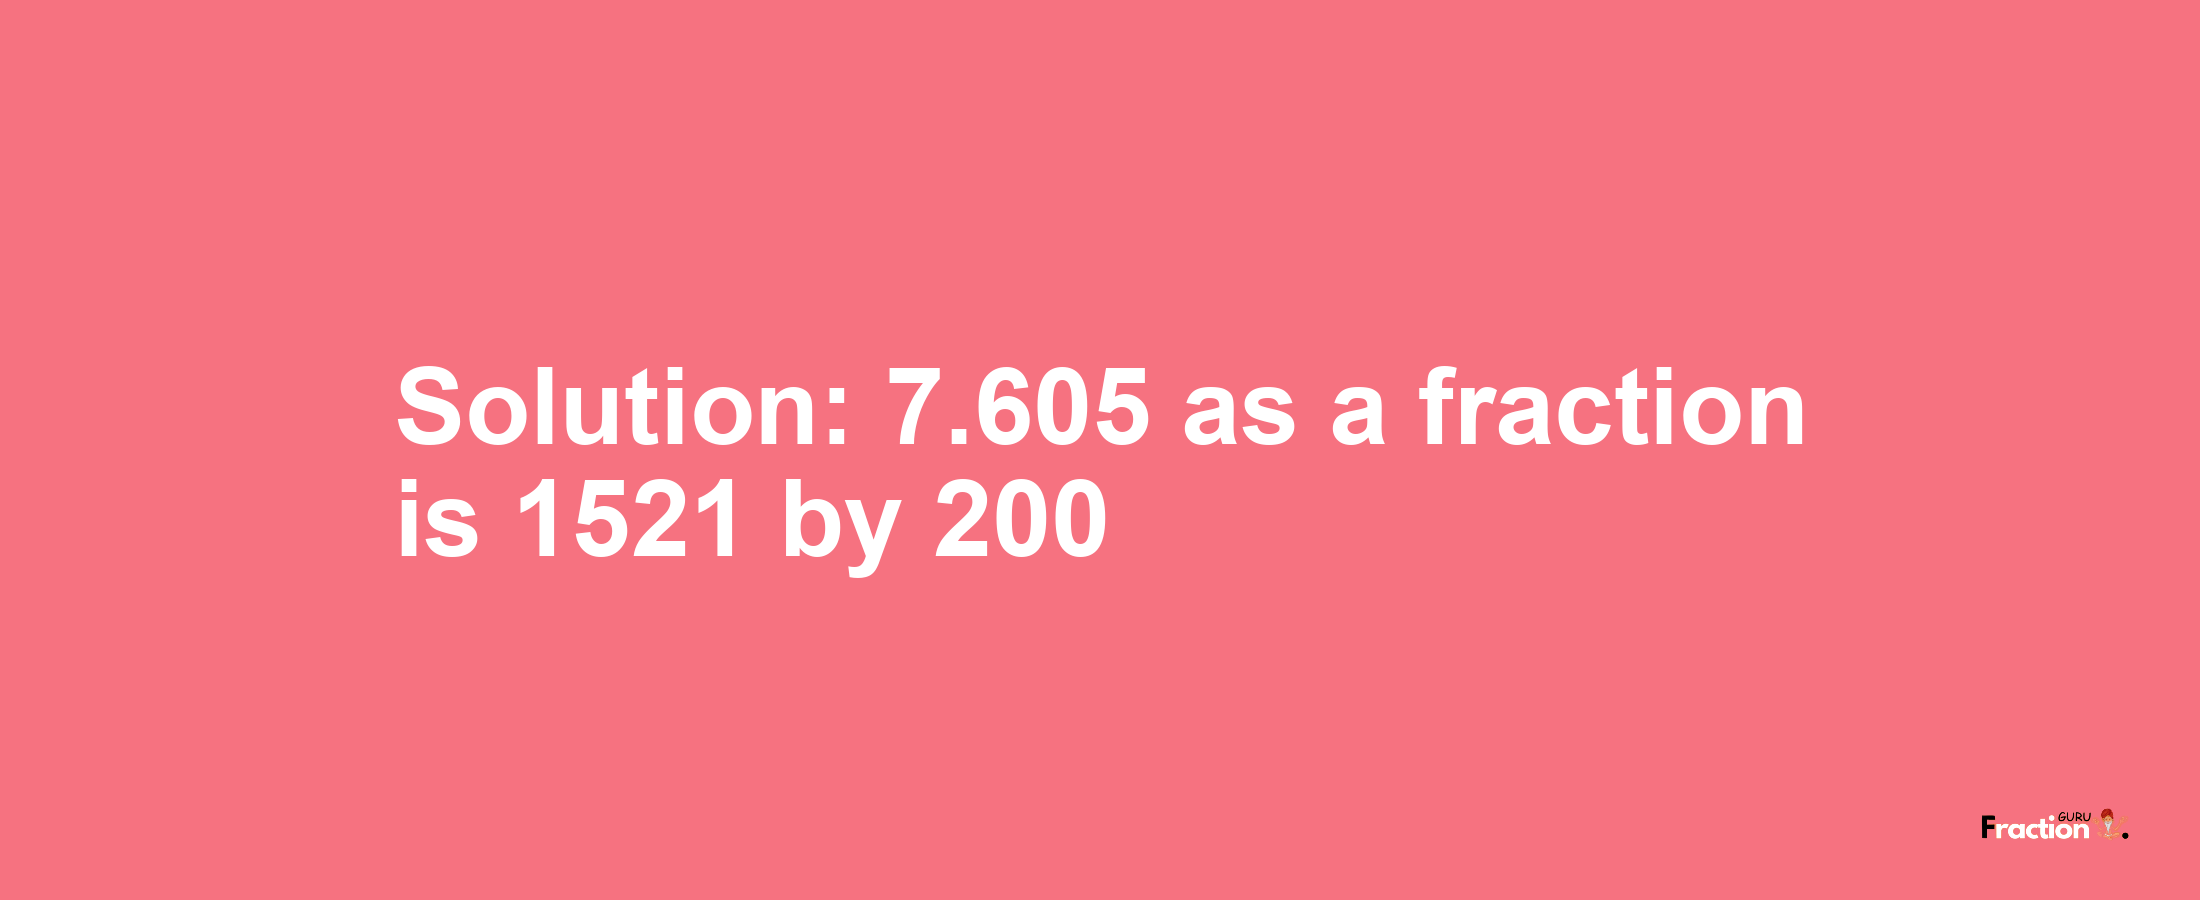 Solution:7.605 as a fraction is 1521/200